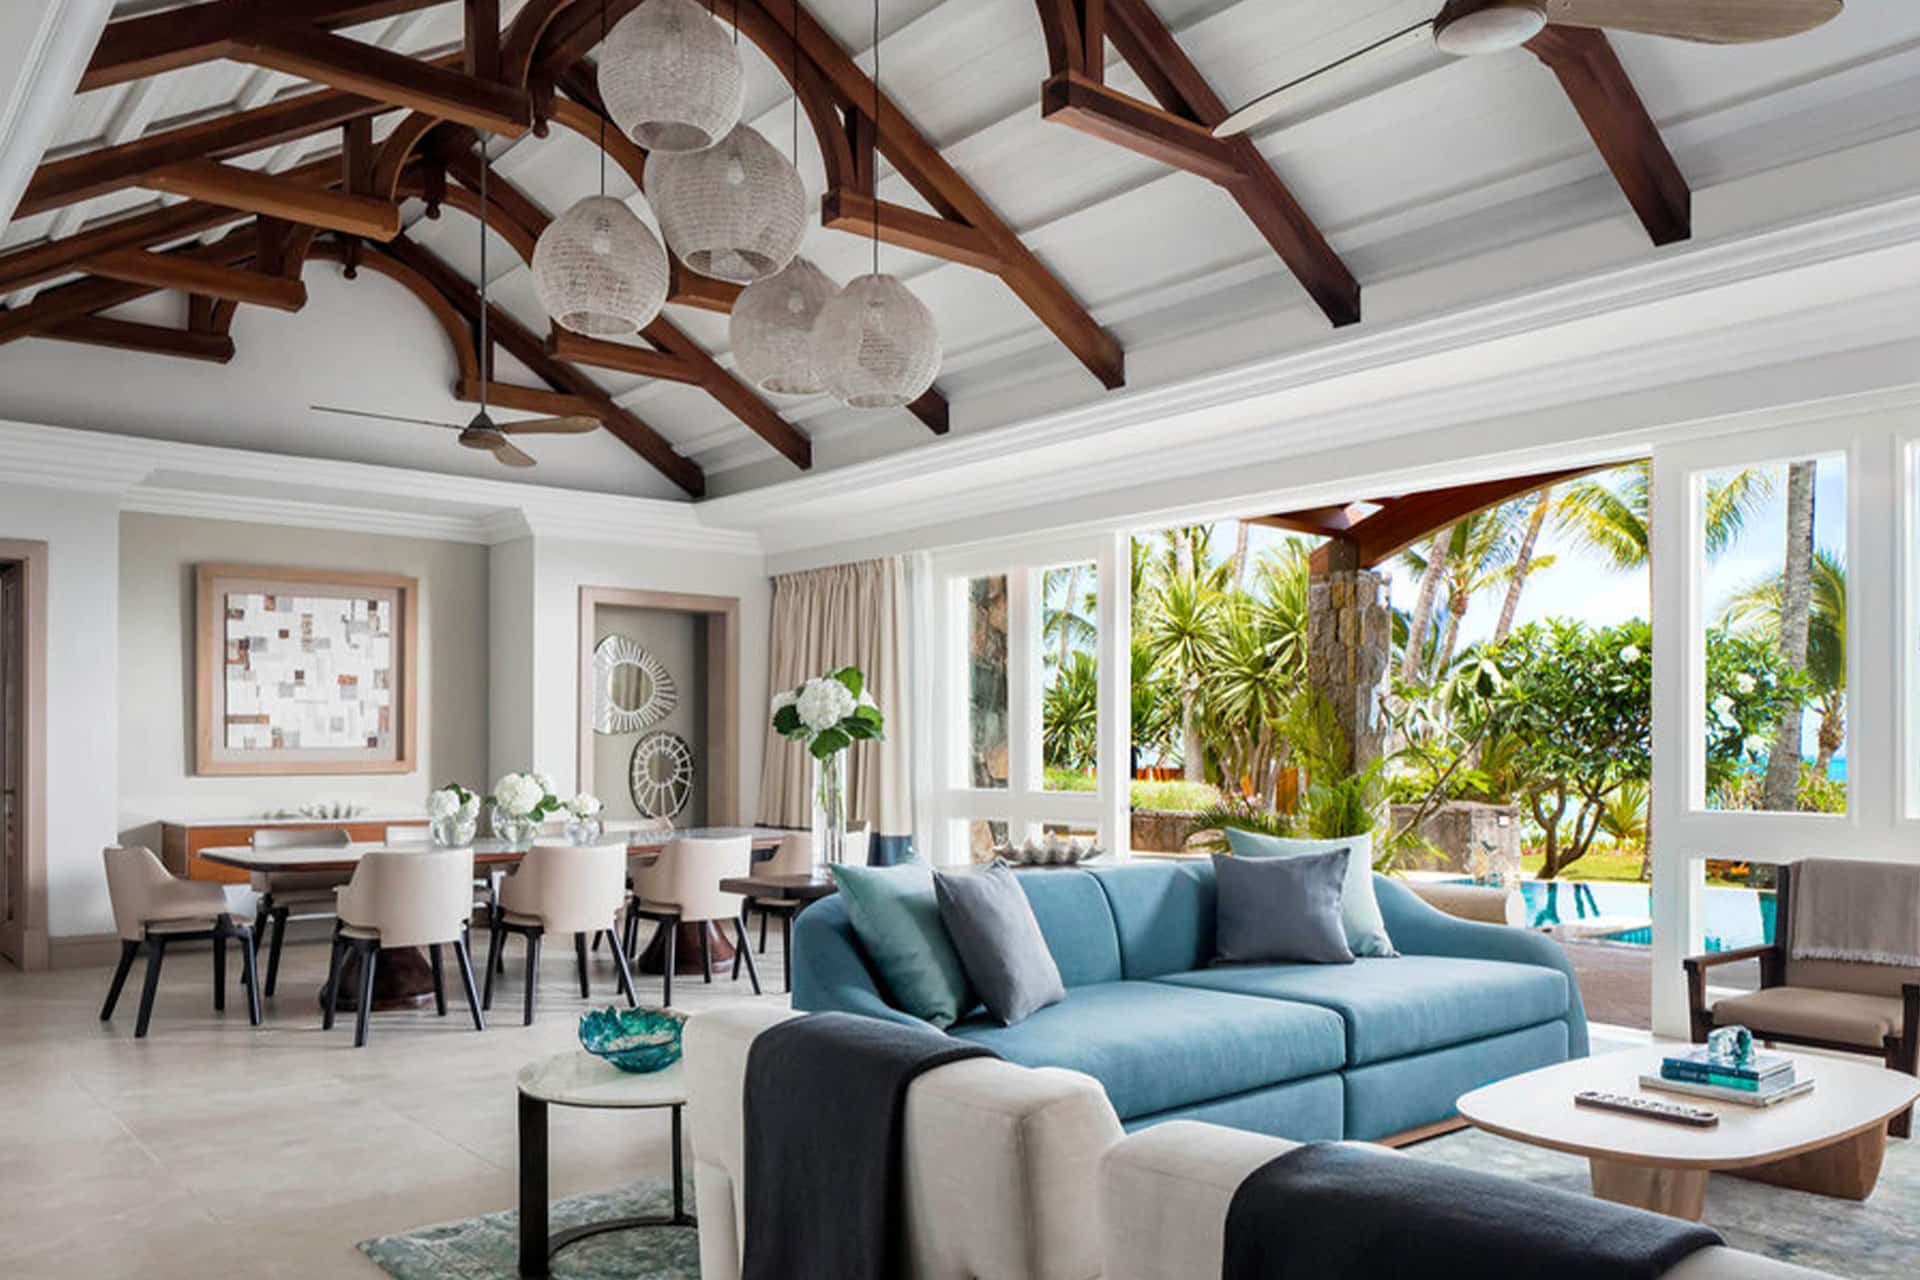 The lounge area of Villa One at One & Only Le Saint Géran, Mauritius.